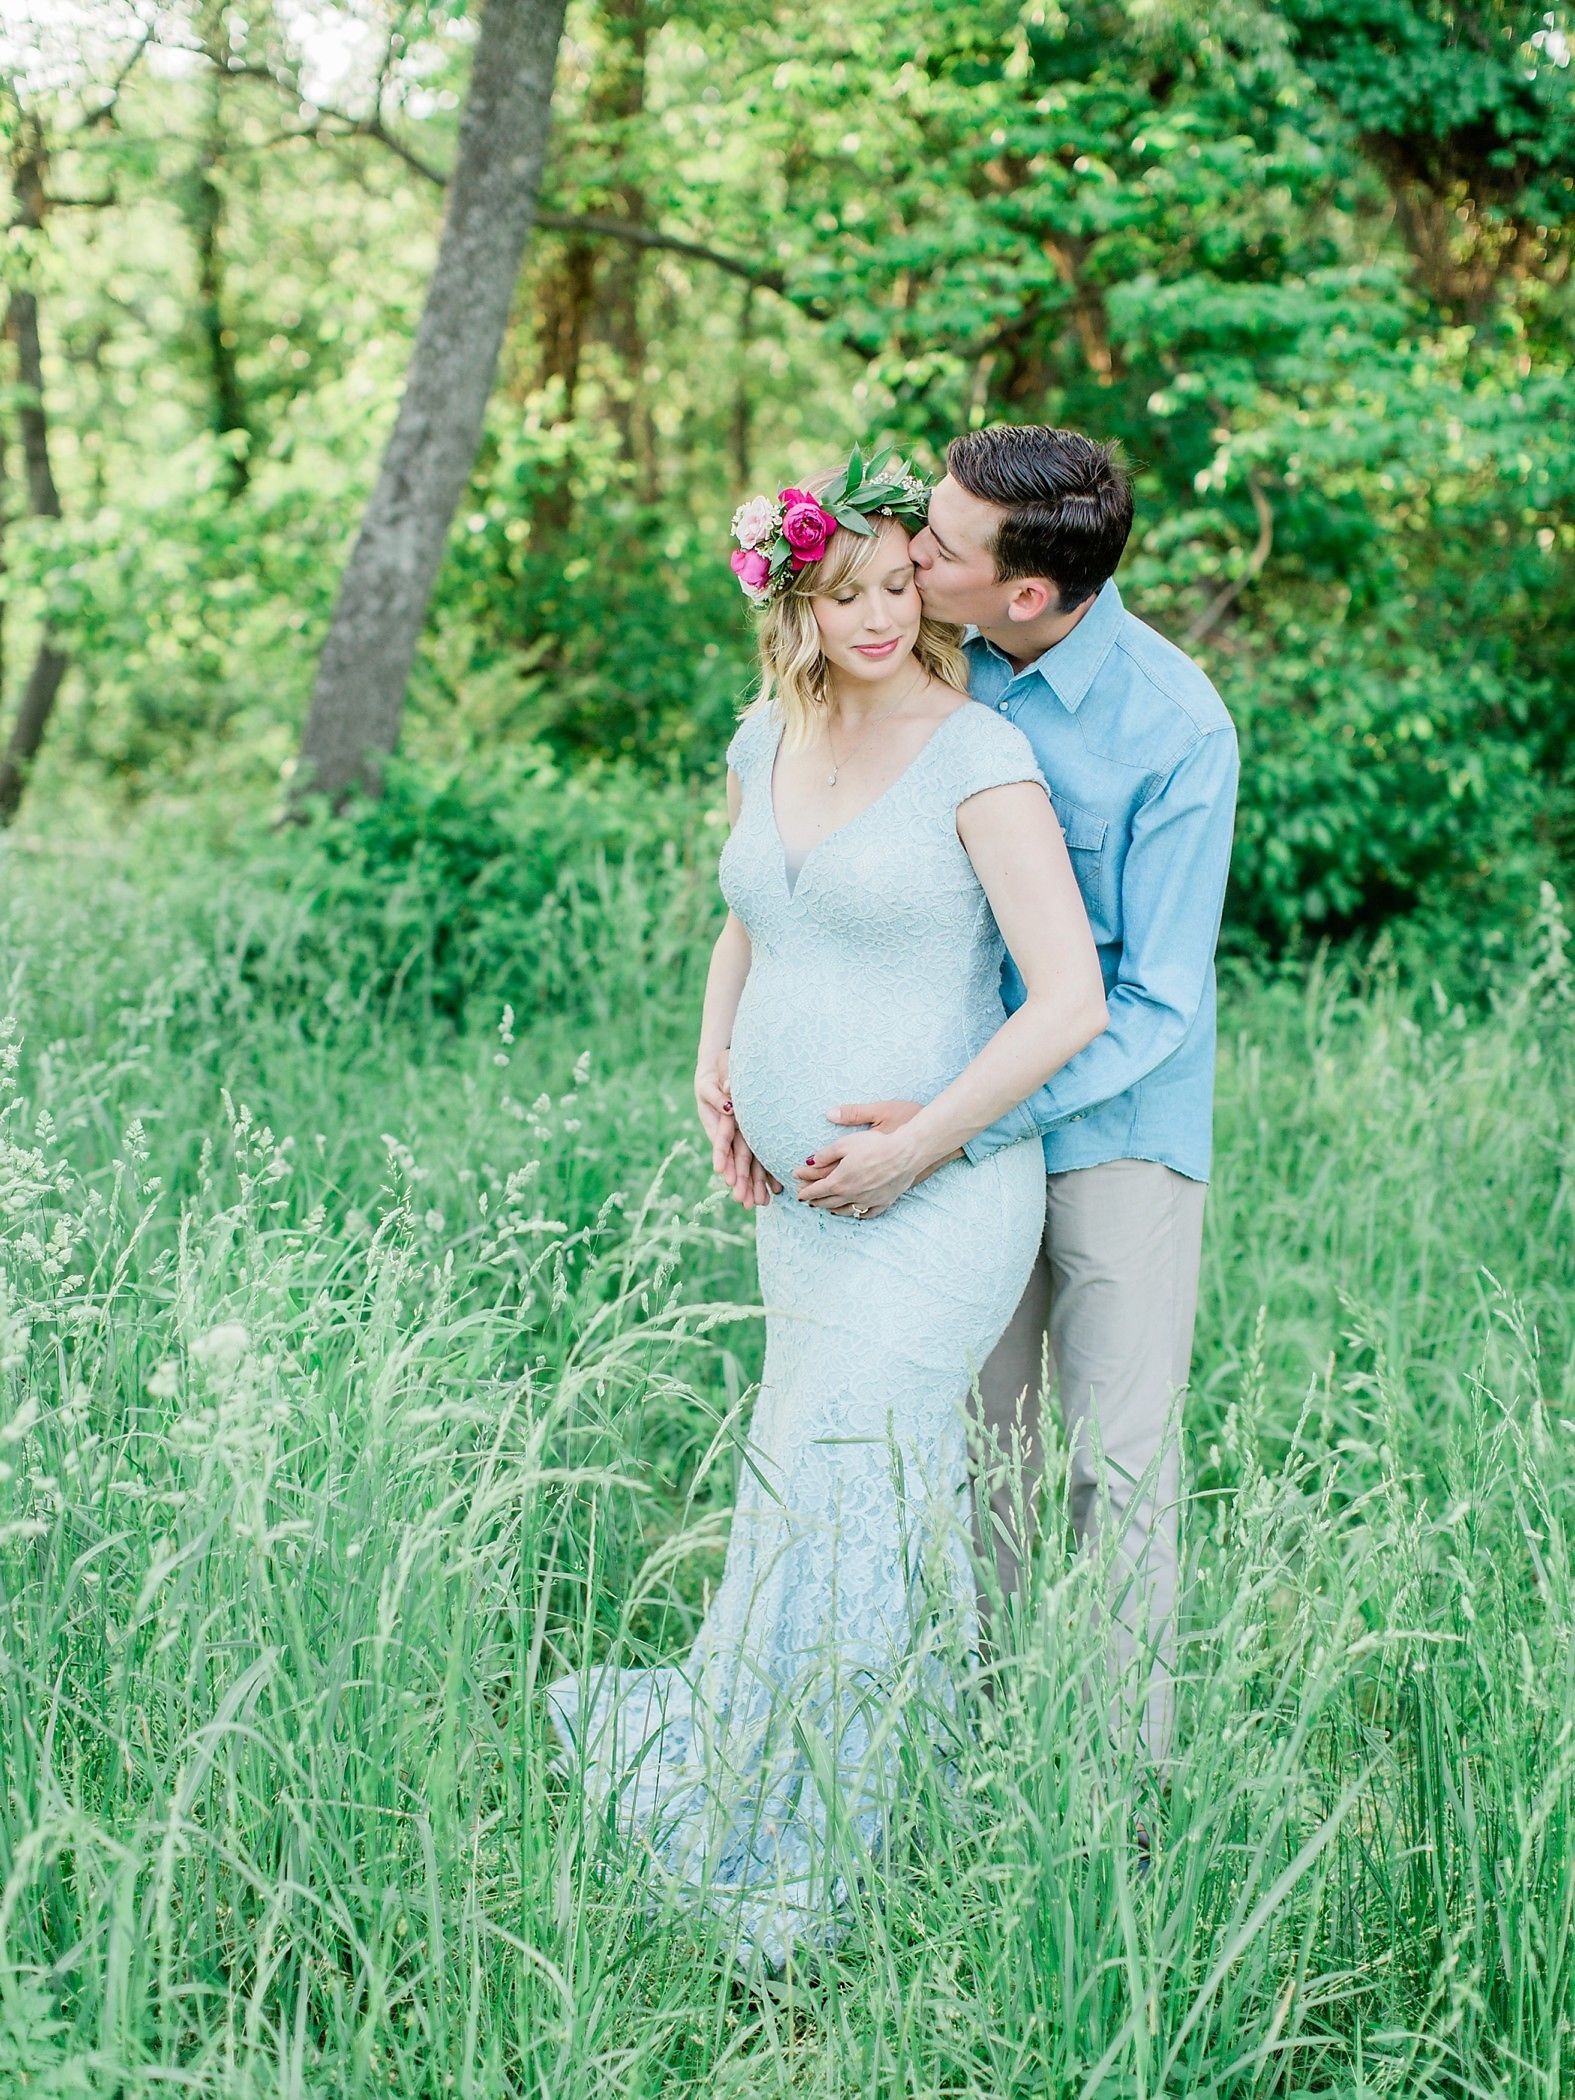 Maternity session in a field